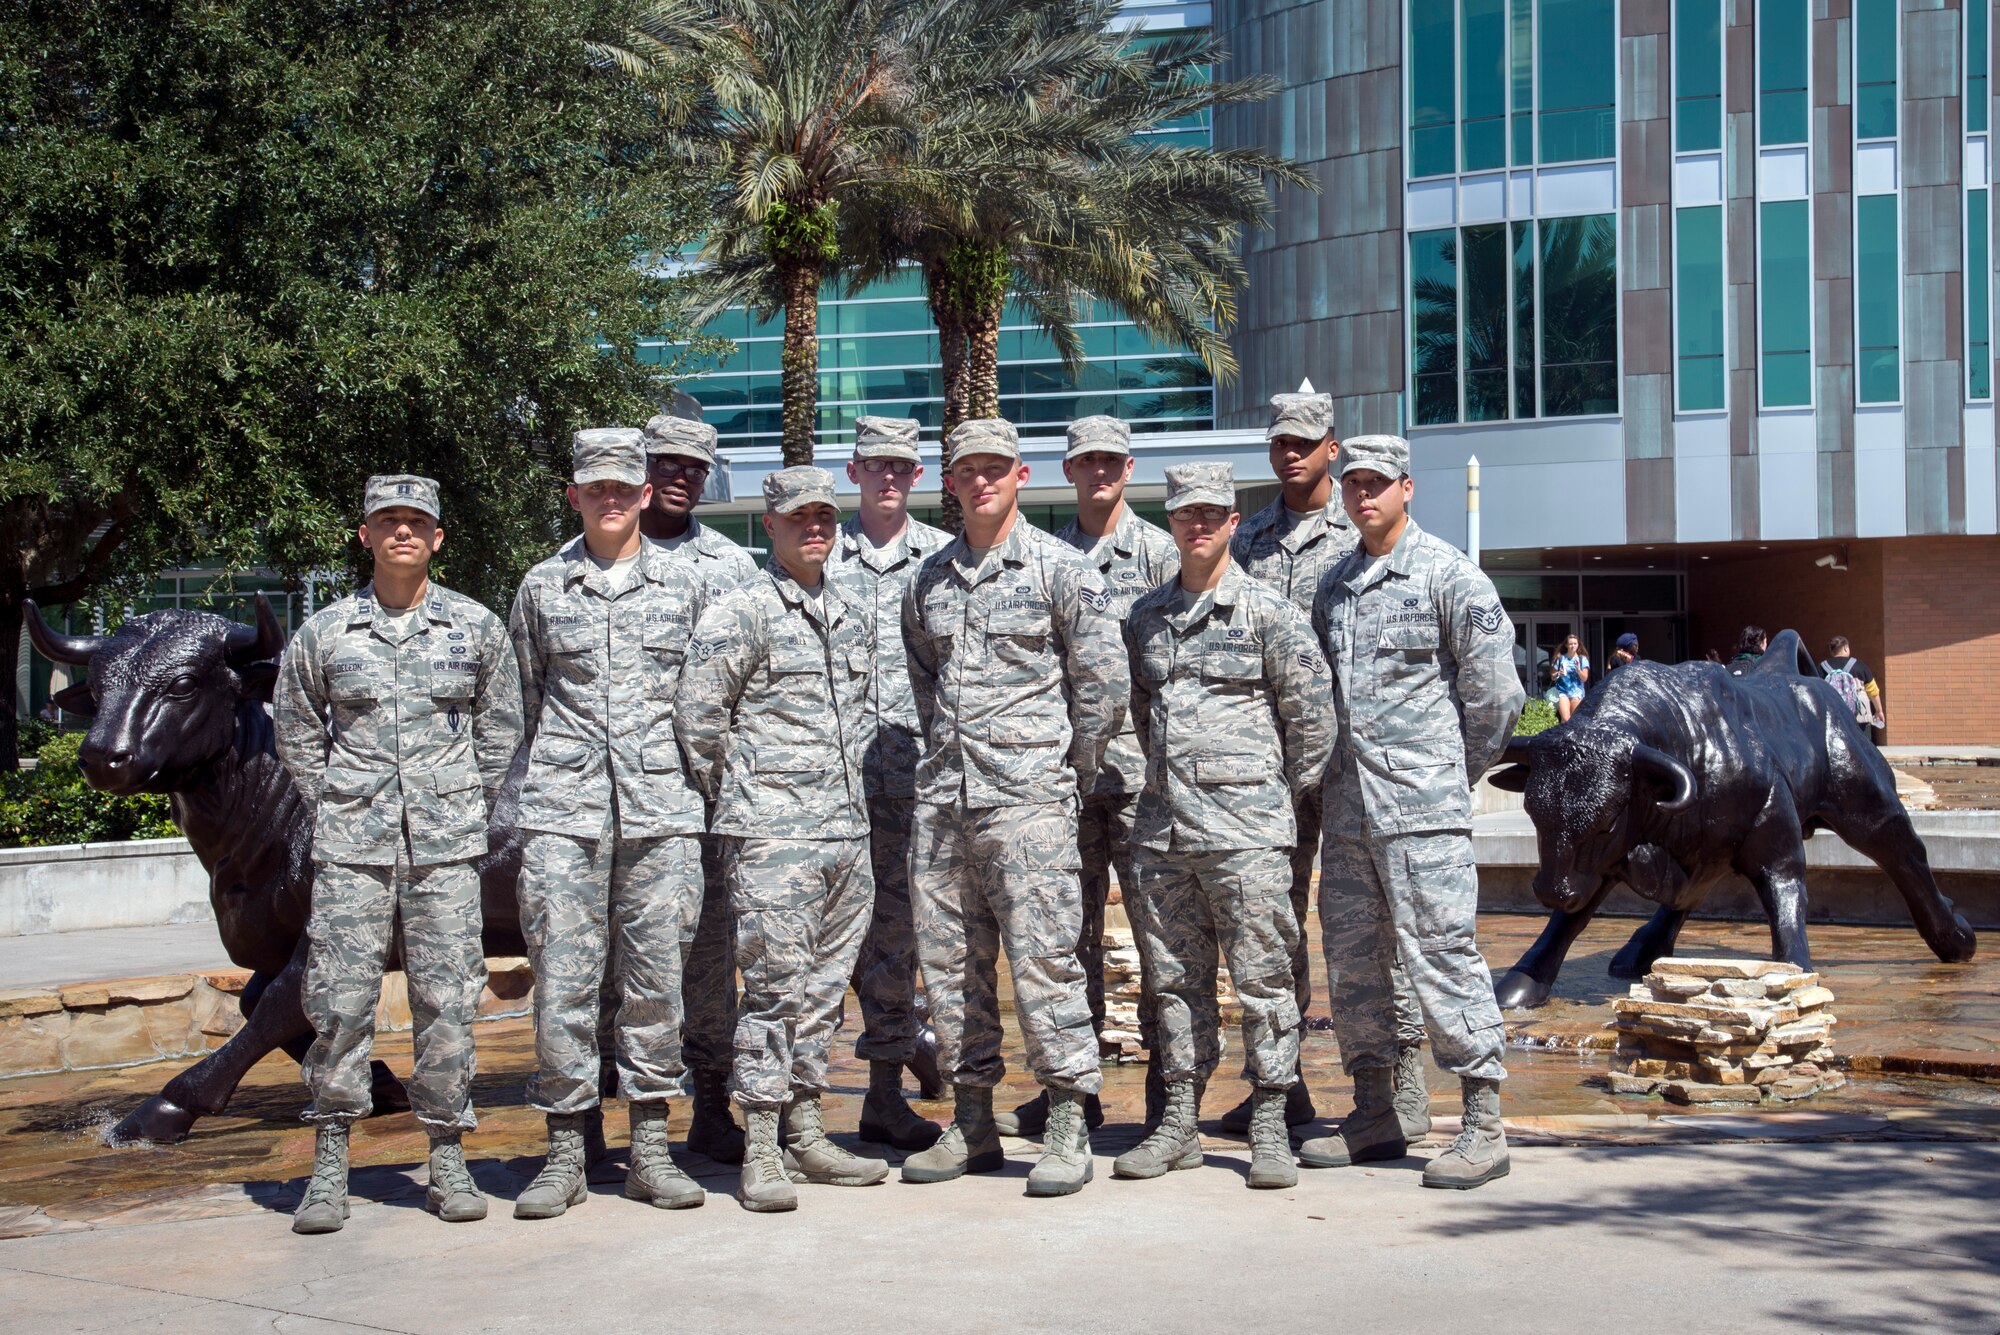 Ten U.S. Air Force Airmen assigned to the 6th Operational Support Squadron at MacDill Air Force Base, Fla., pause for a photo at the University of South Florida, Tampa campus, Sept. 20, 2018.